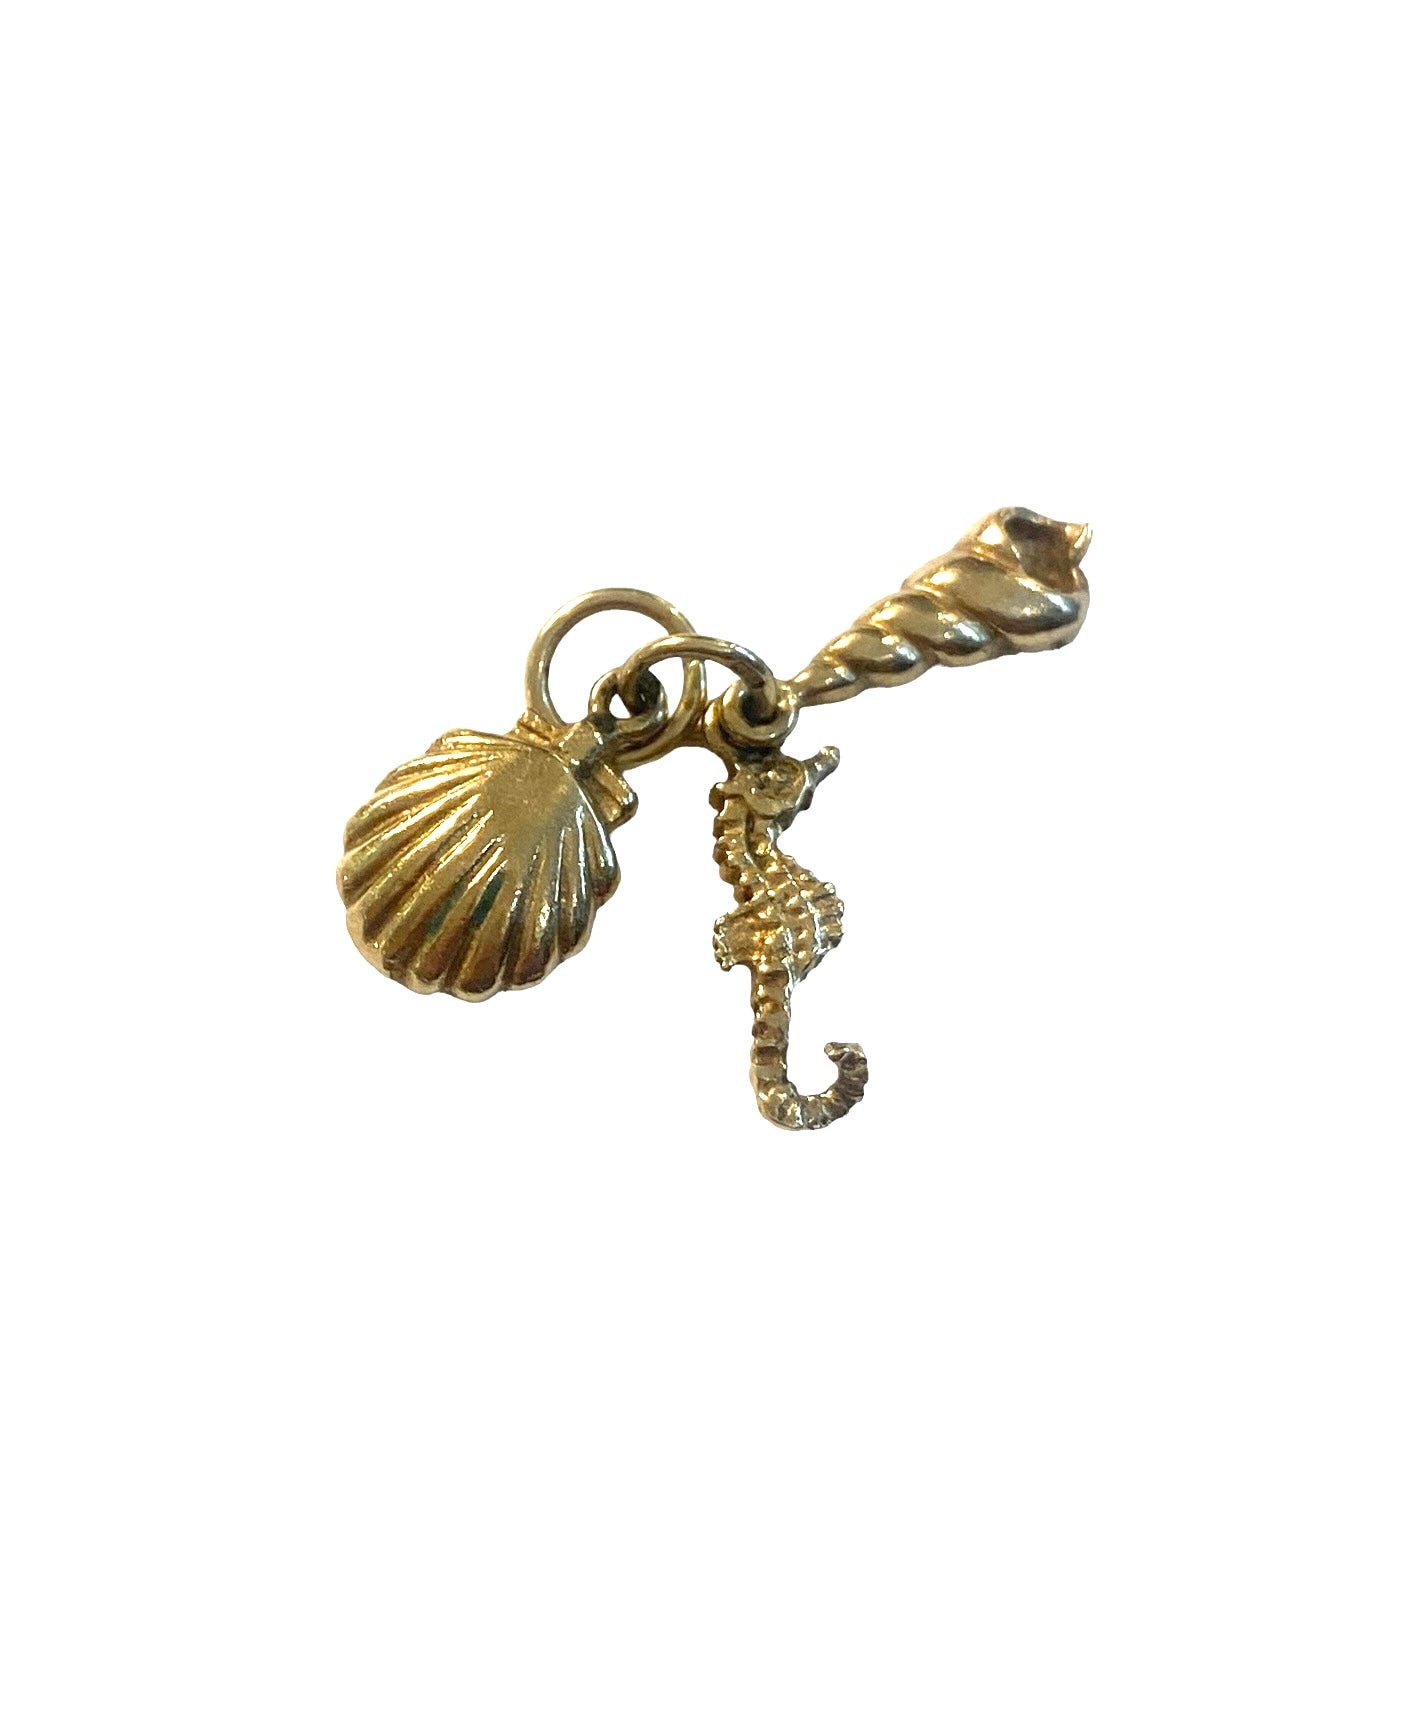 9CT VINTAGE SEALIFE CHARM, SEAHORSE, CONCH AND OYSTER .